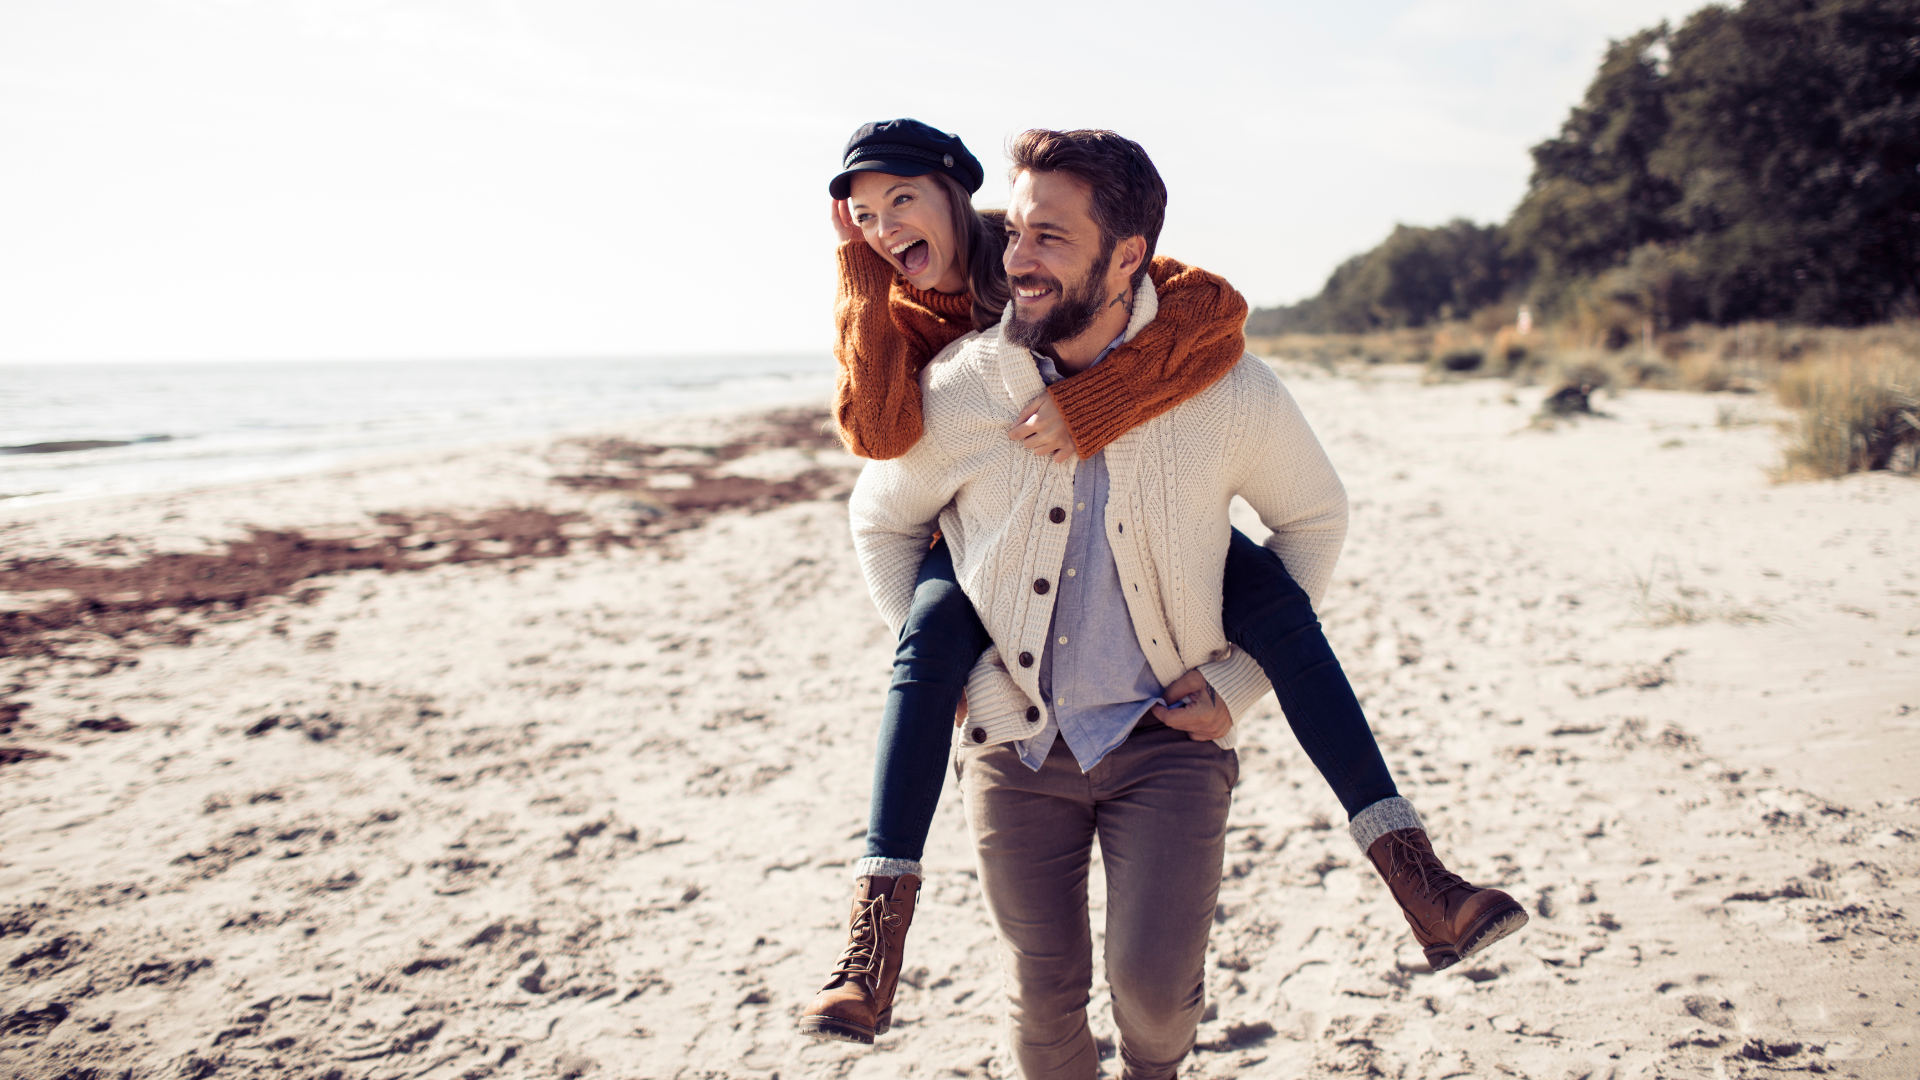 Personality Traits: What Makes A Good Partner